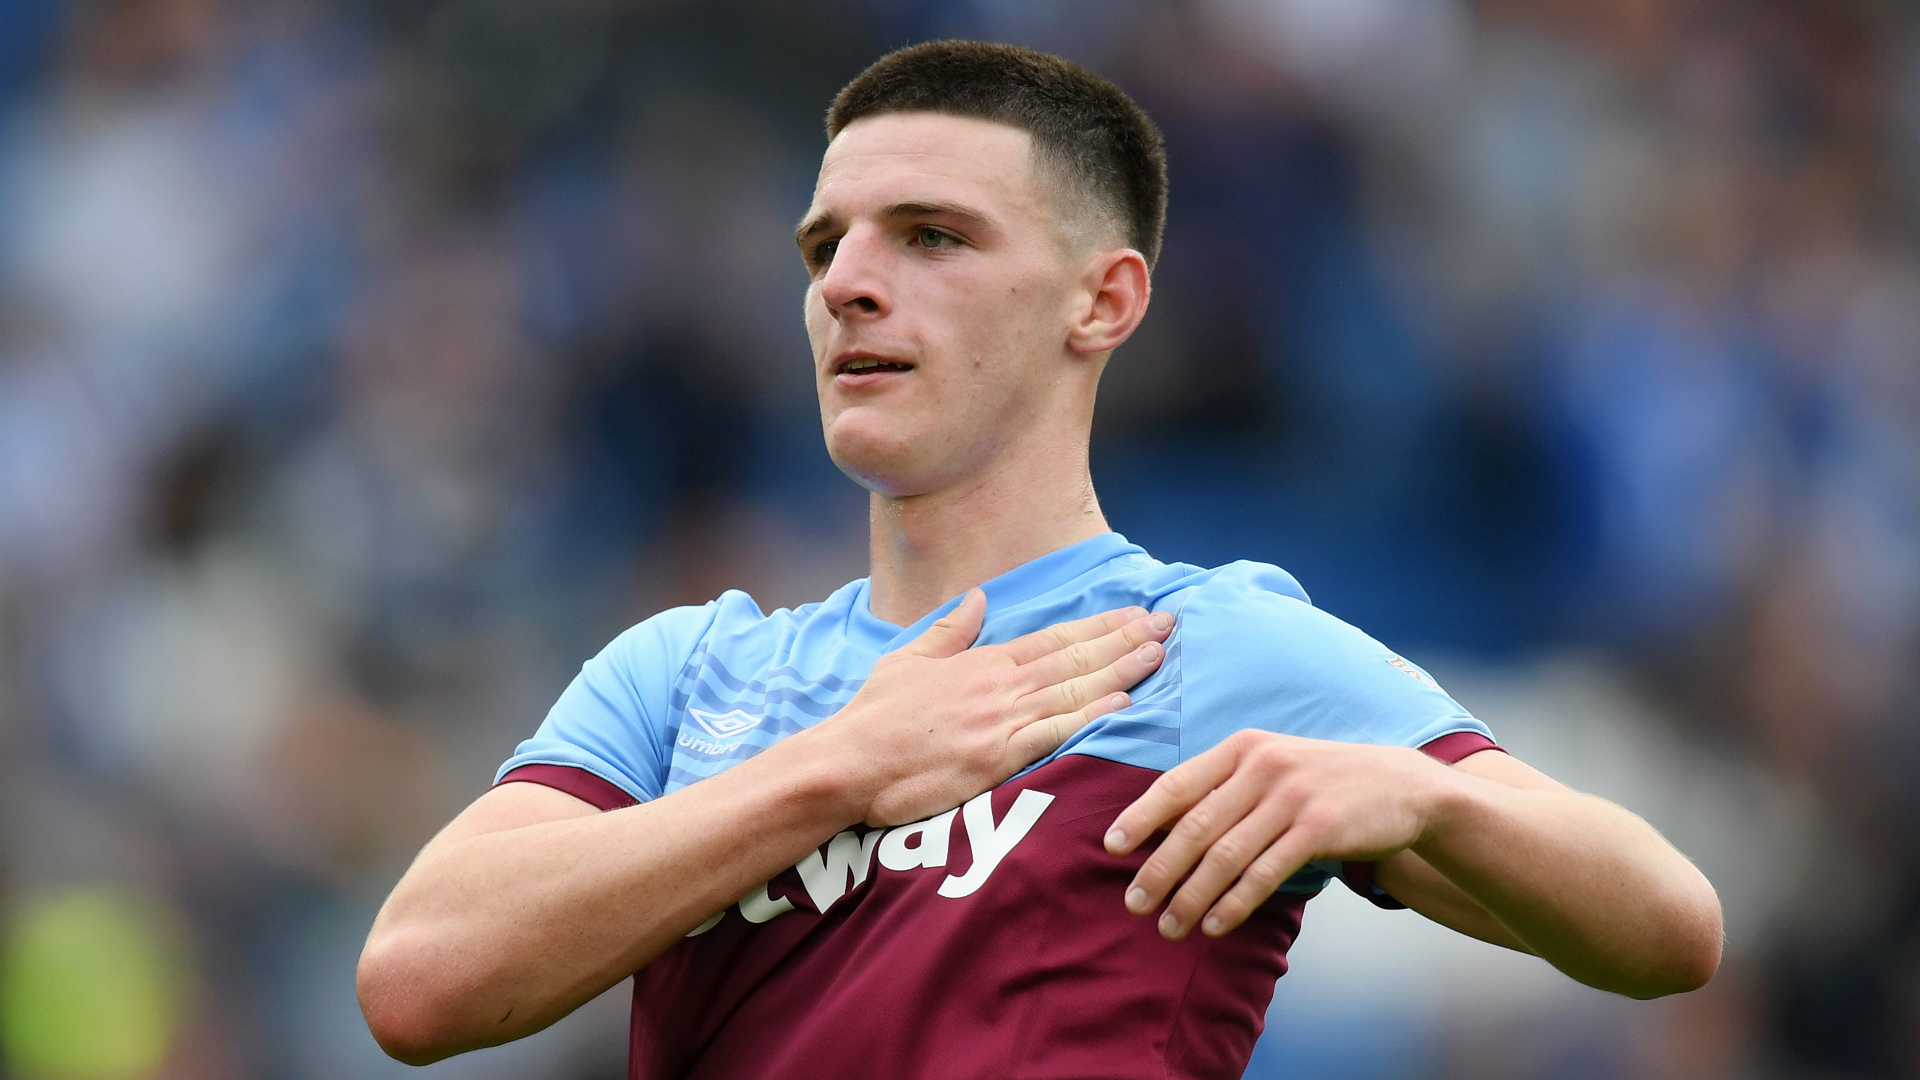 Rumoured Manchester United target Declan Rice is focusing only on West Ham ahead of the clubs' Premier League clash on Sunday.